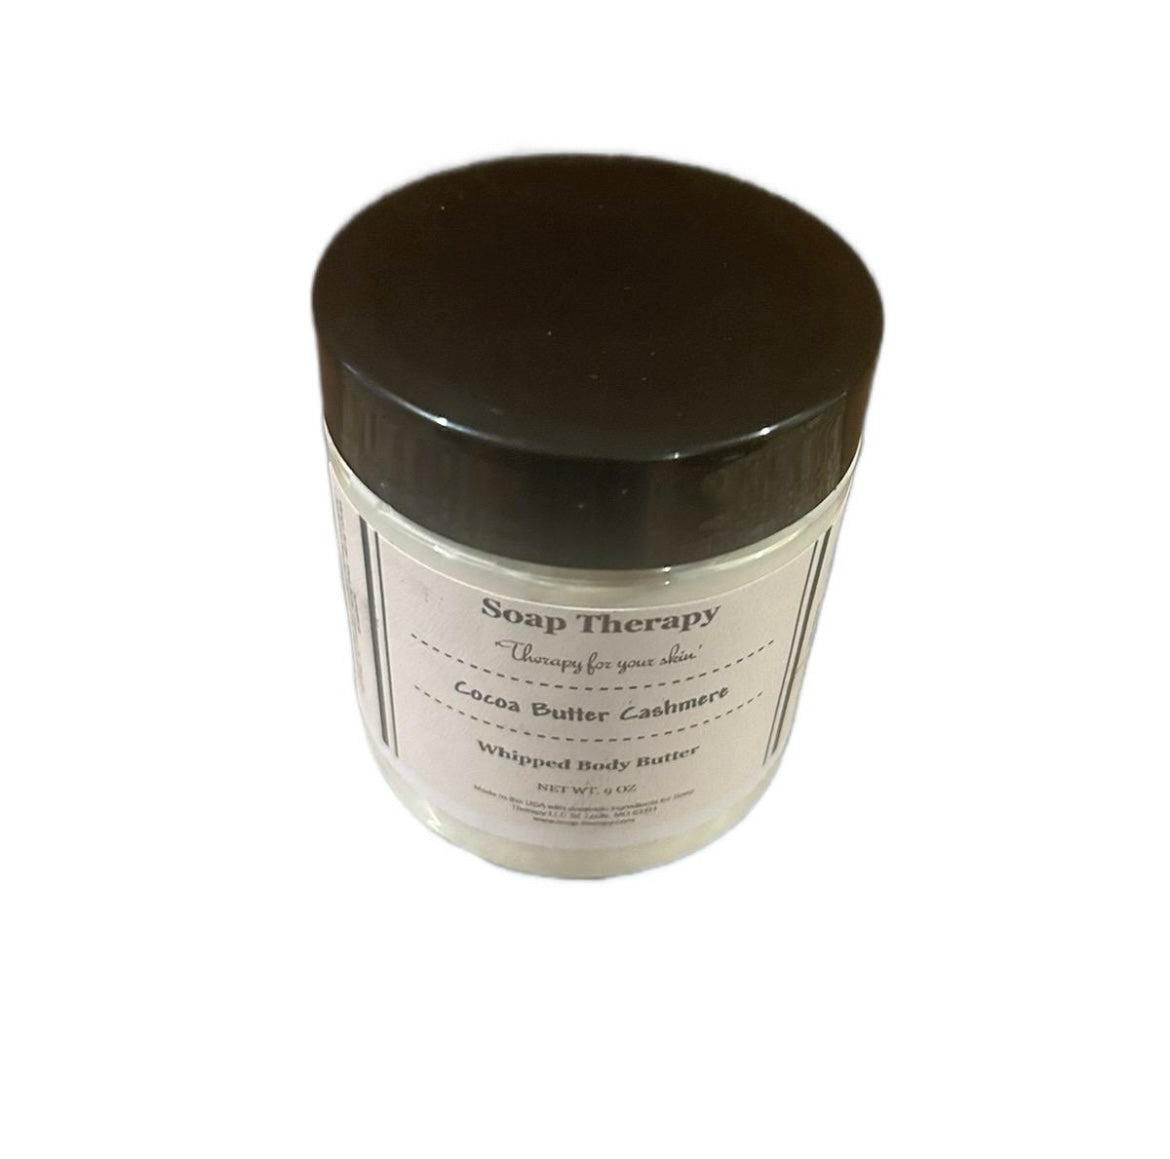 Body Cocoa Butter Cashmere Whipped Butter